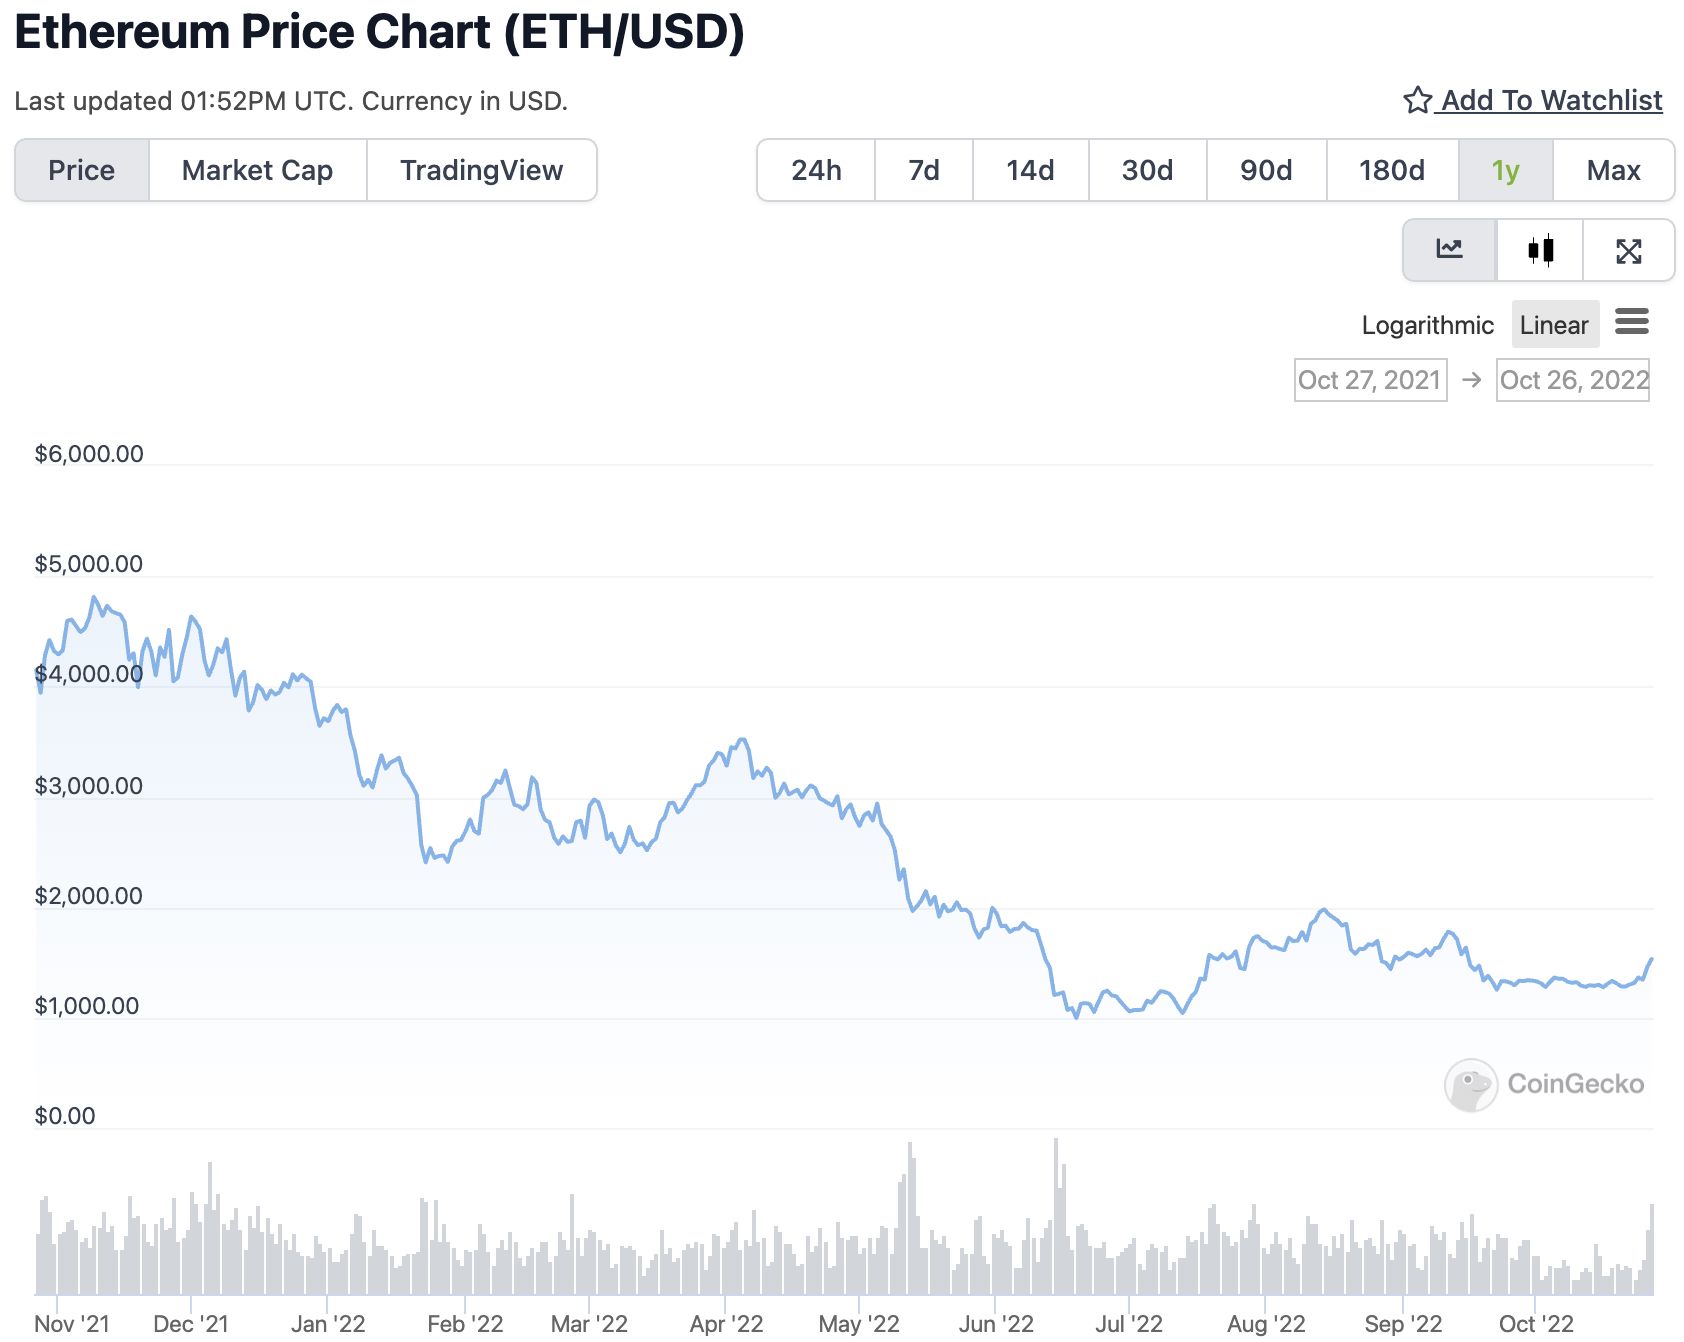 Ethereum price chart covering periods 2021 to 2022